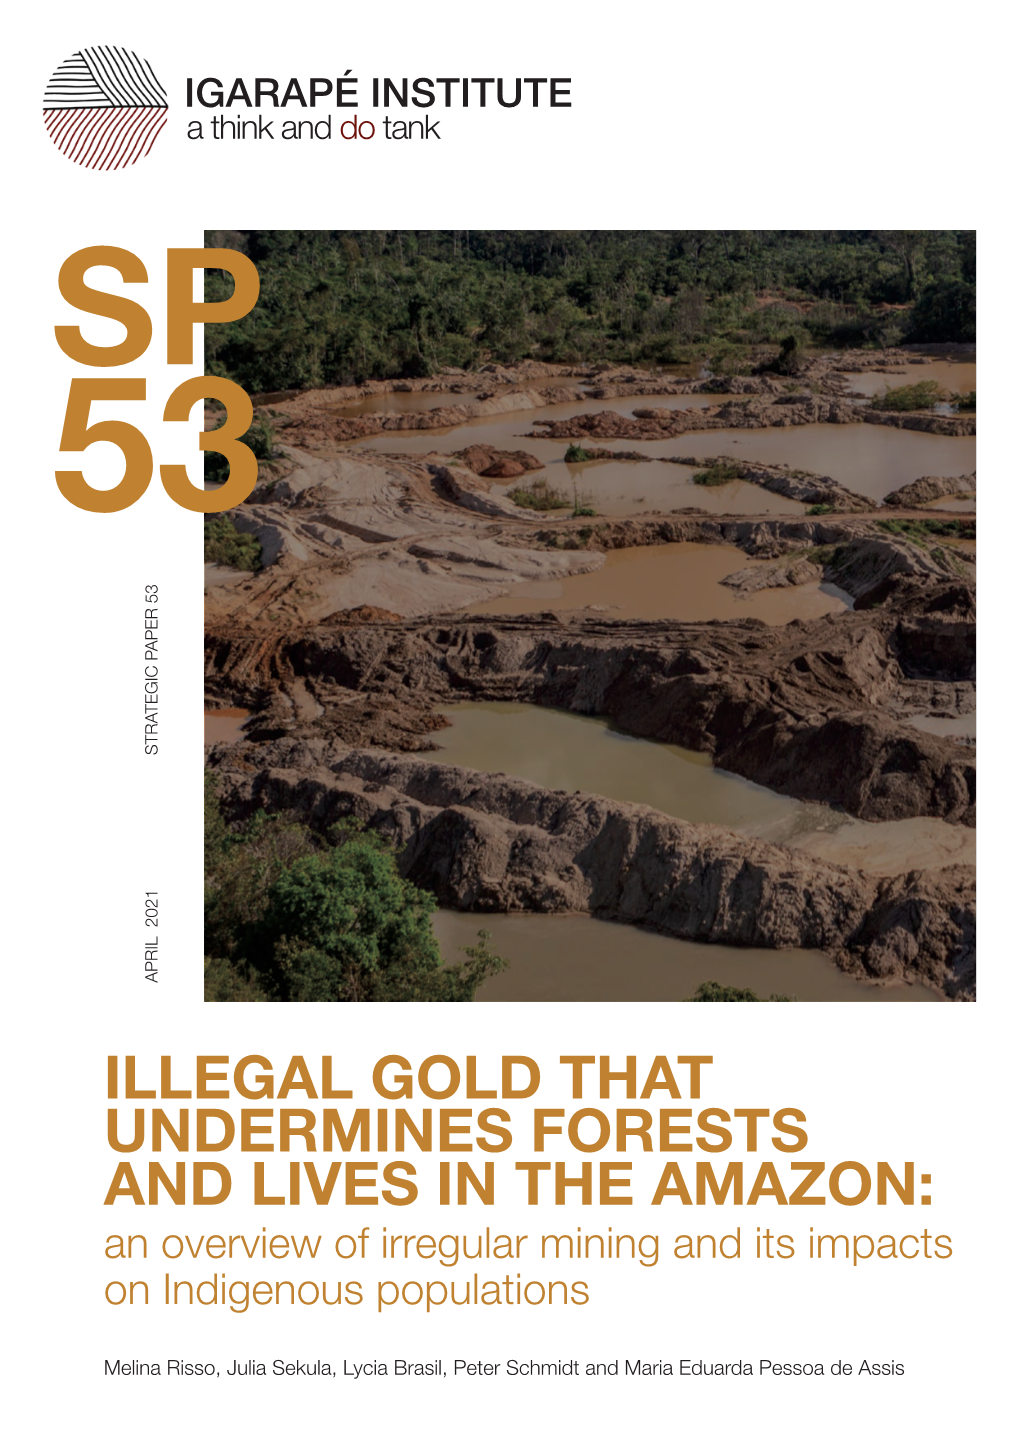 ILLEGAL GOLD THAT UNDERMINES FORESTS and LIVES in the AMAZON: an Overview of Irregular Mining and Its Impacts on Indigenous Populations